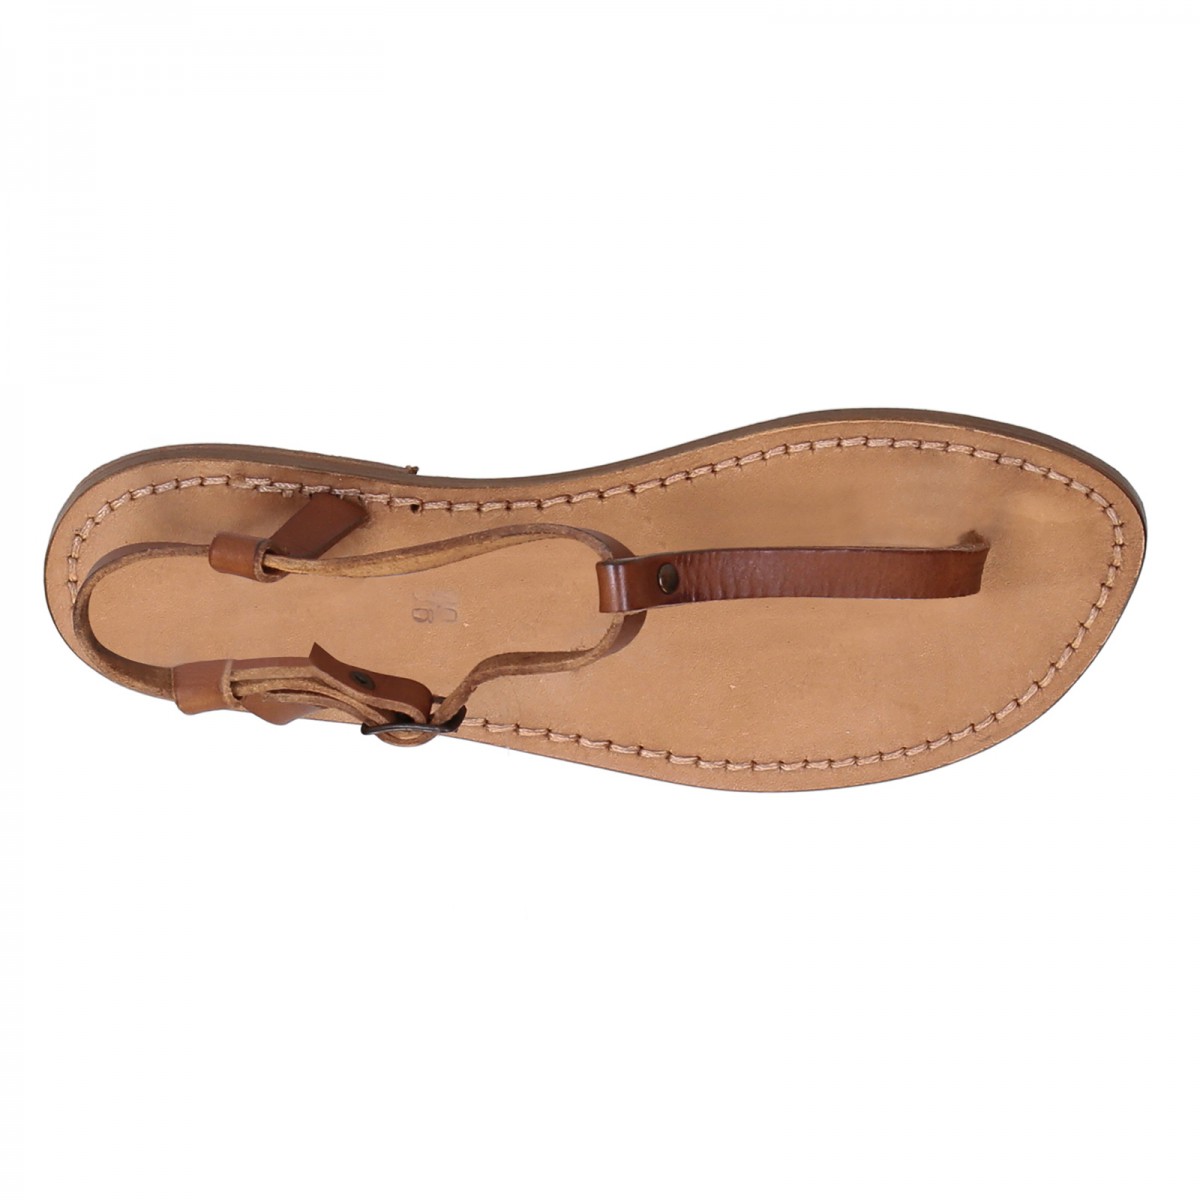 T-strap thong sandals in tan Leather handmade in Italy | The leather ...